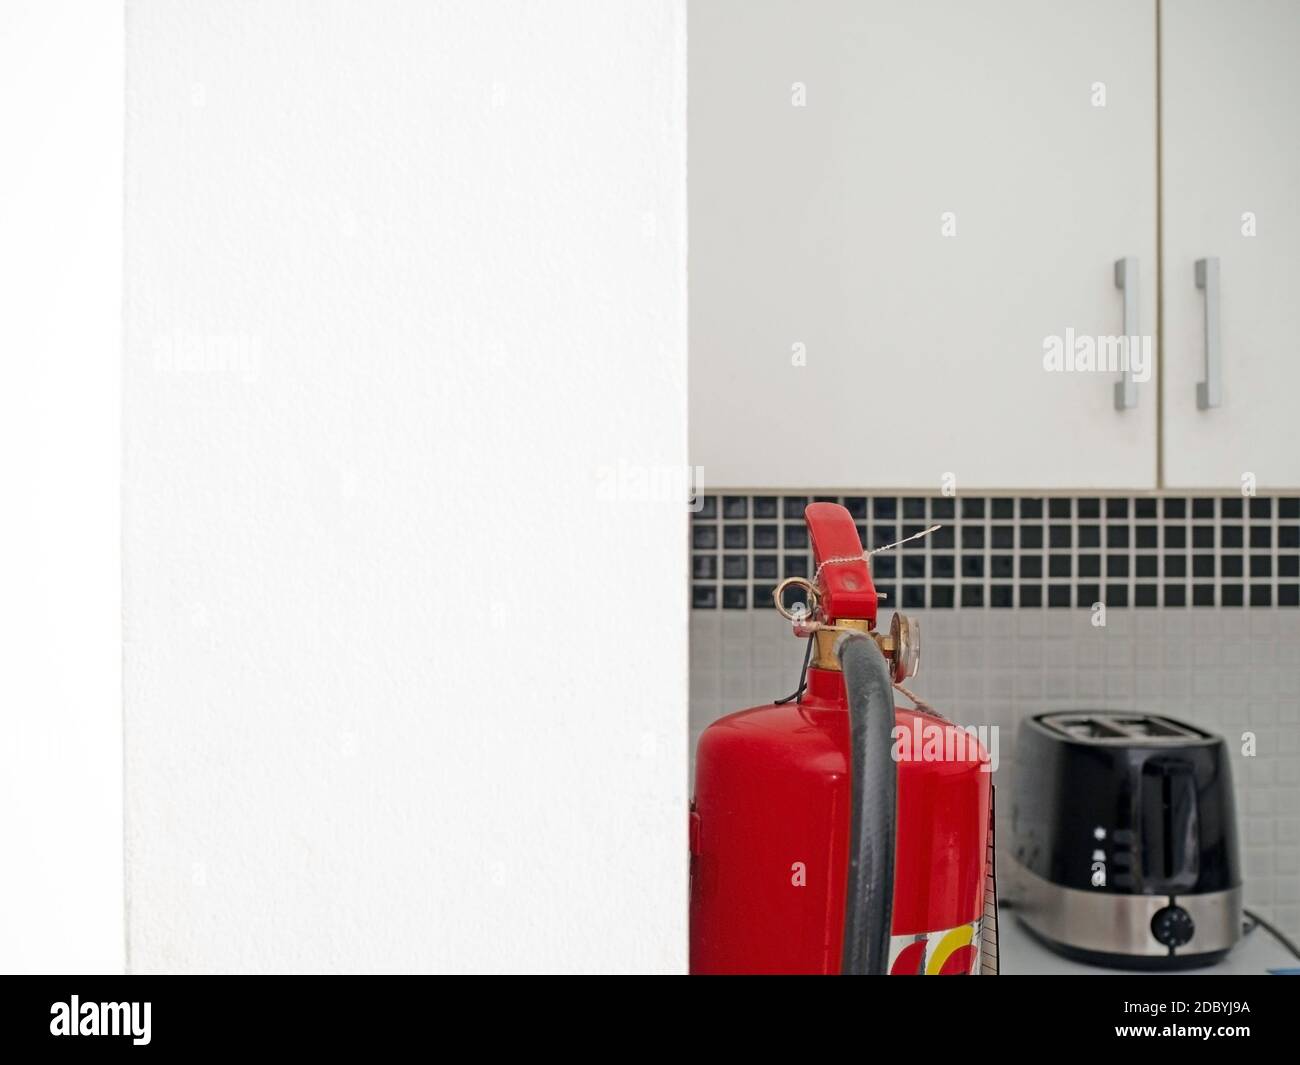 Image of fire extinguishers in the kitchen Stock Photo